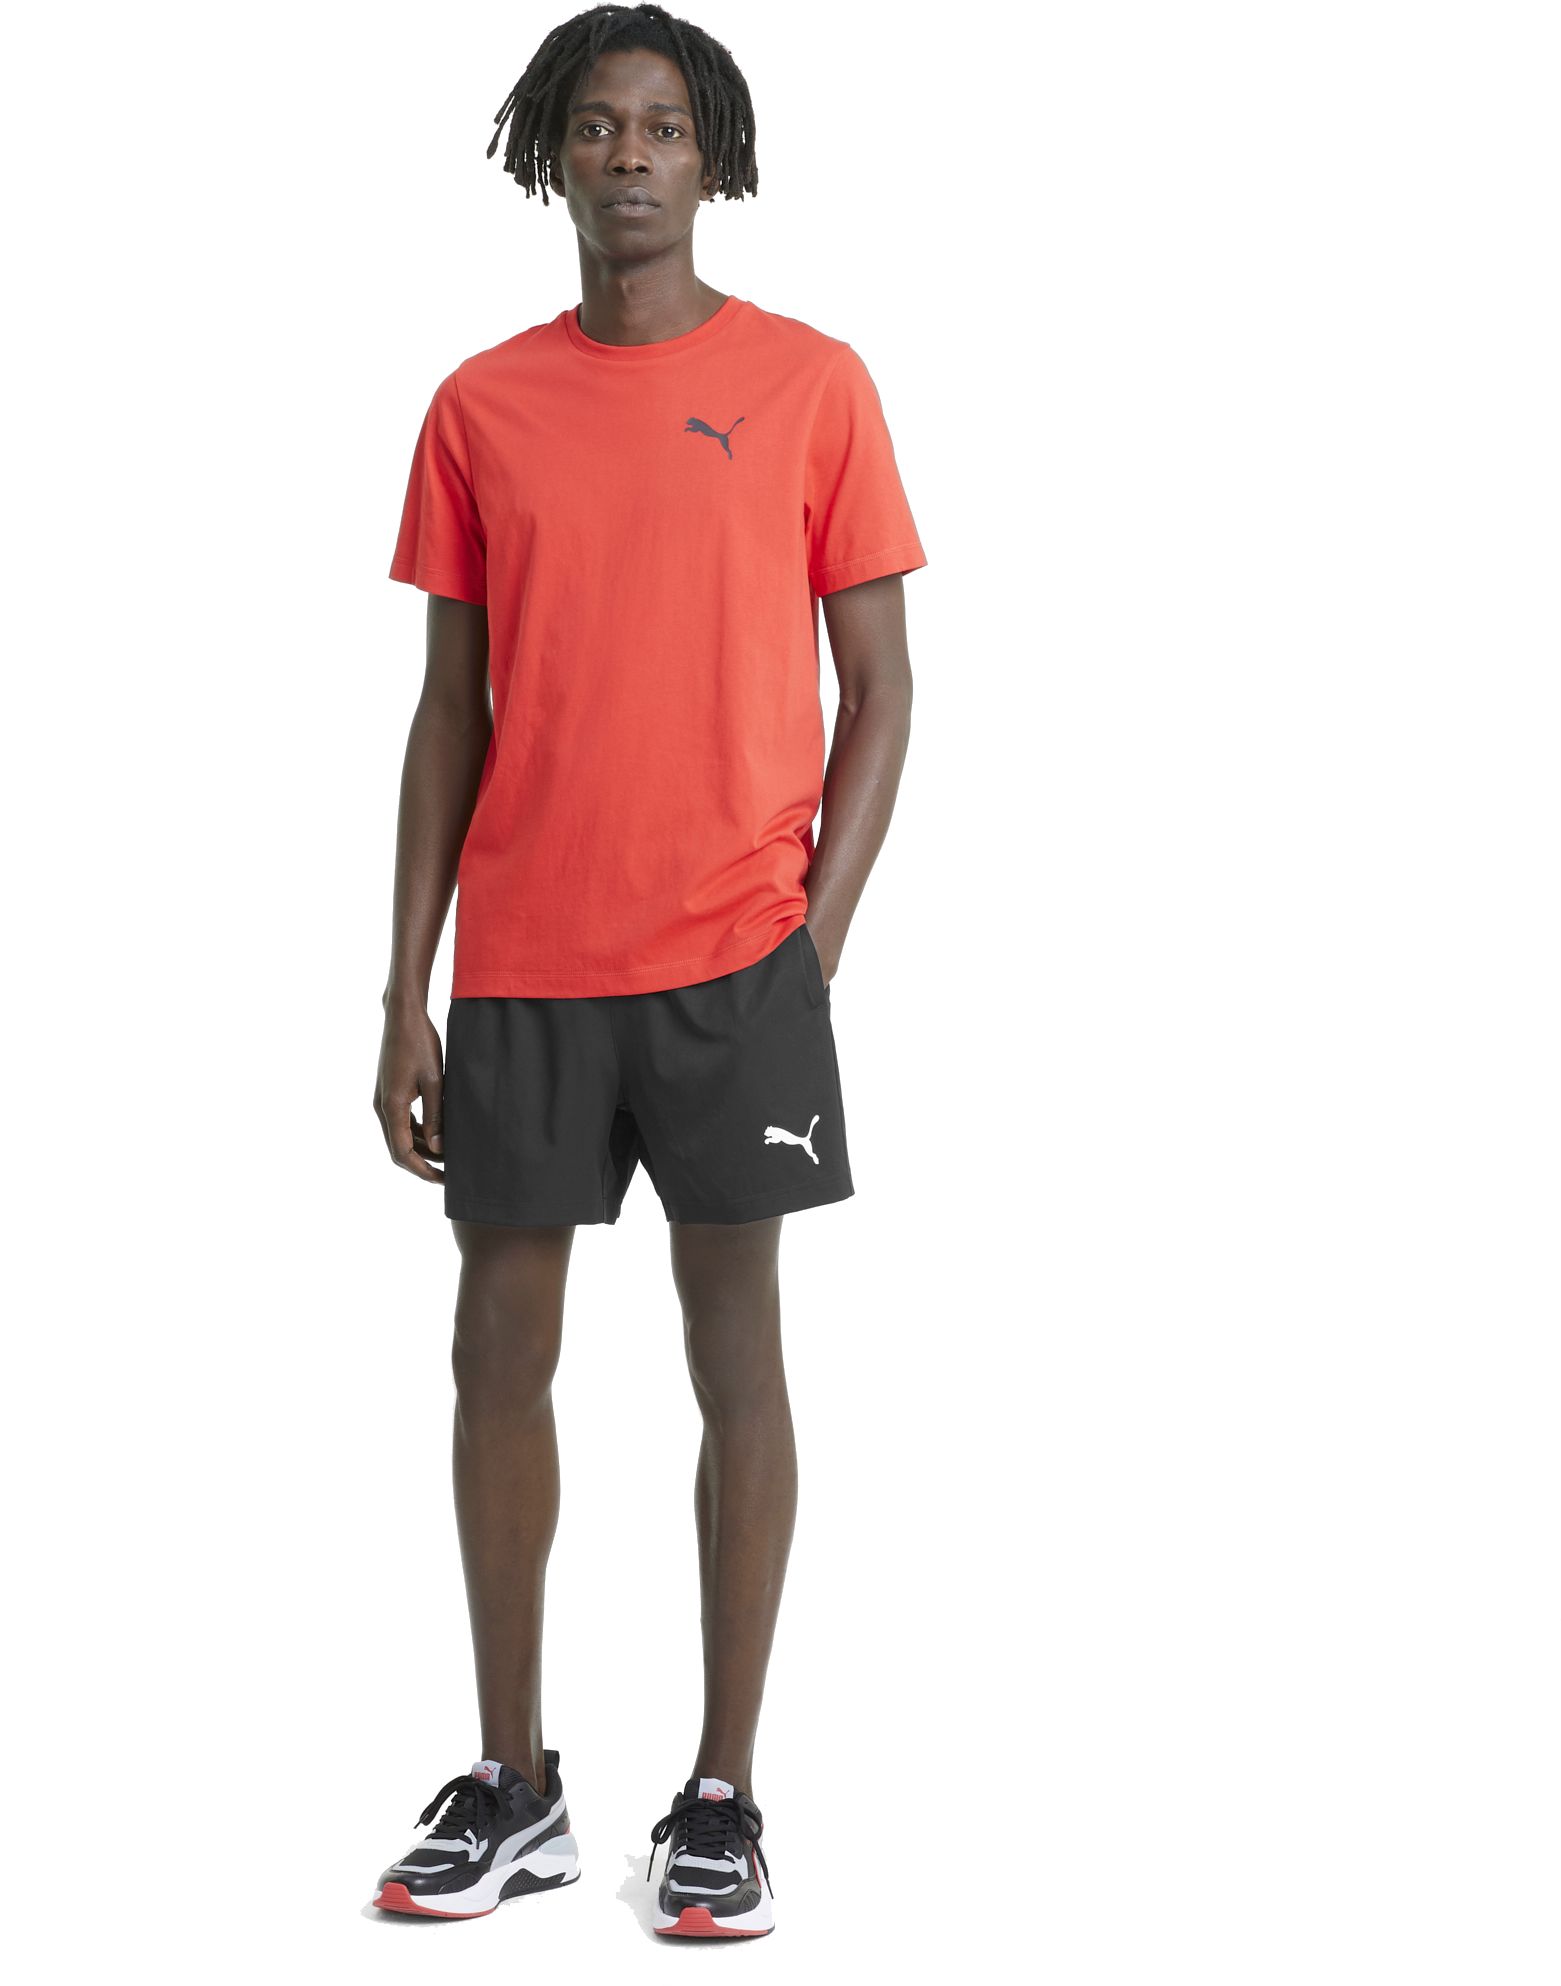 PUMA, M ACTIVE WOVEN SHORTS 5IN